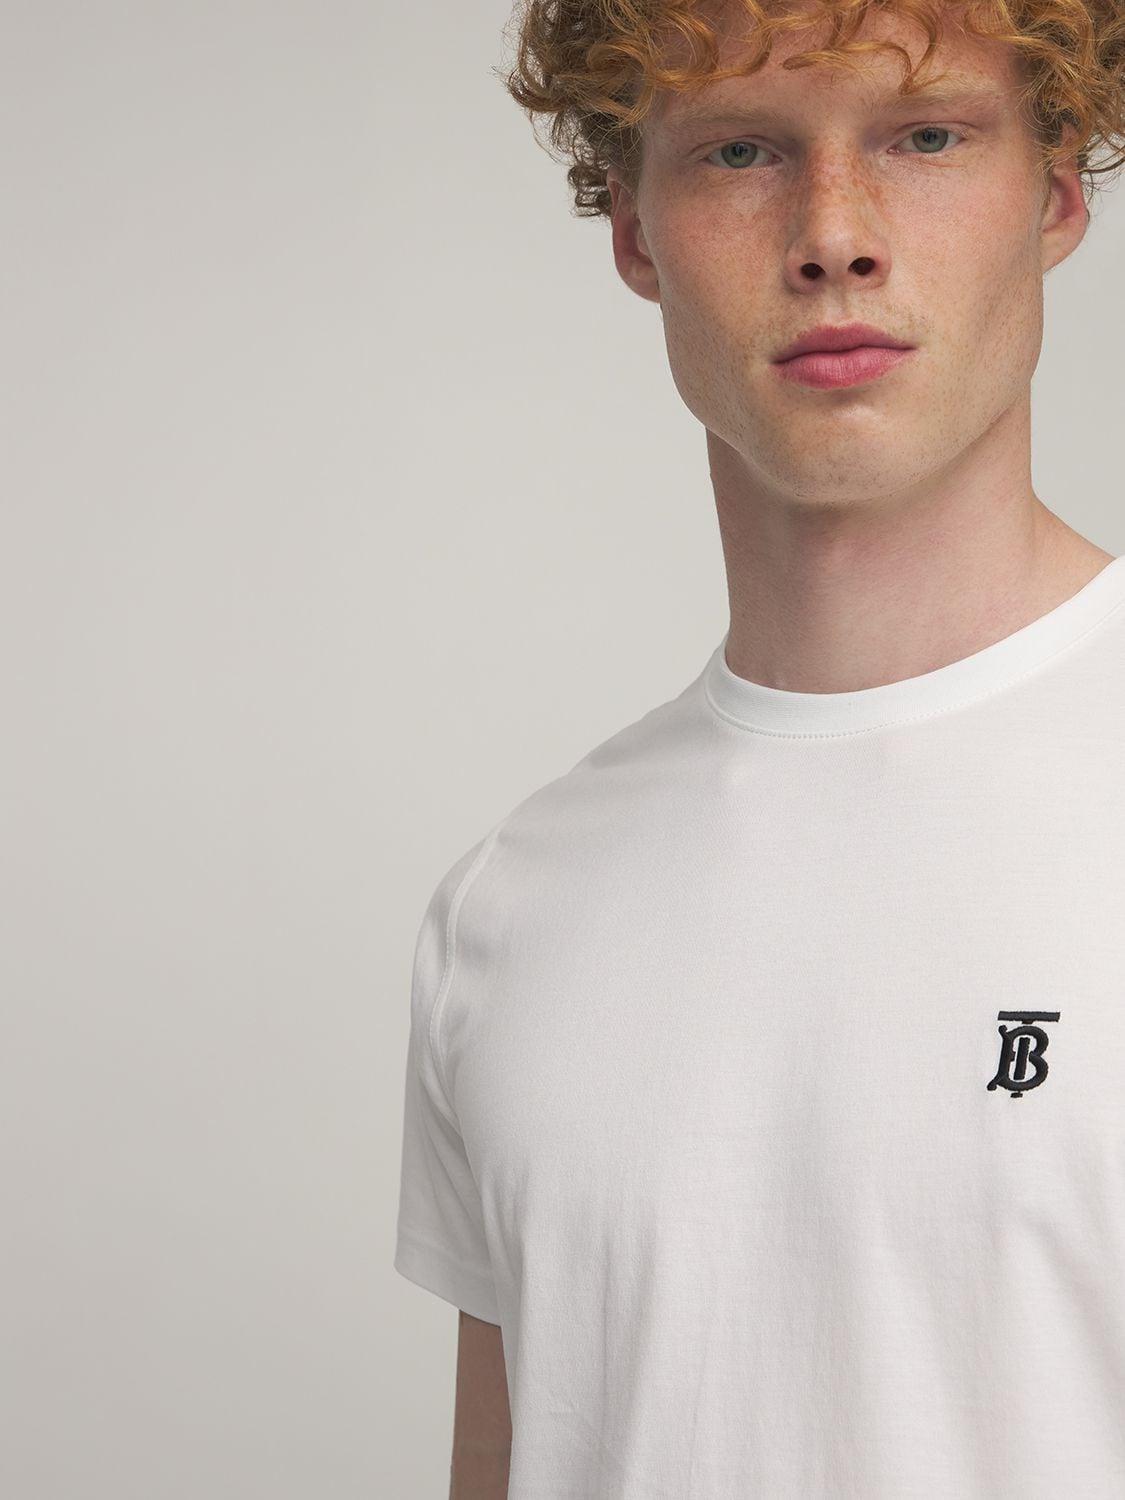 Burberry Tb Logo Embroidery Cotton Jersey T-shirt in White for Men 